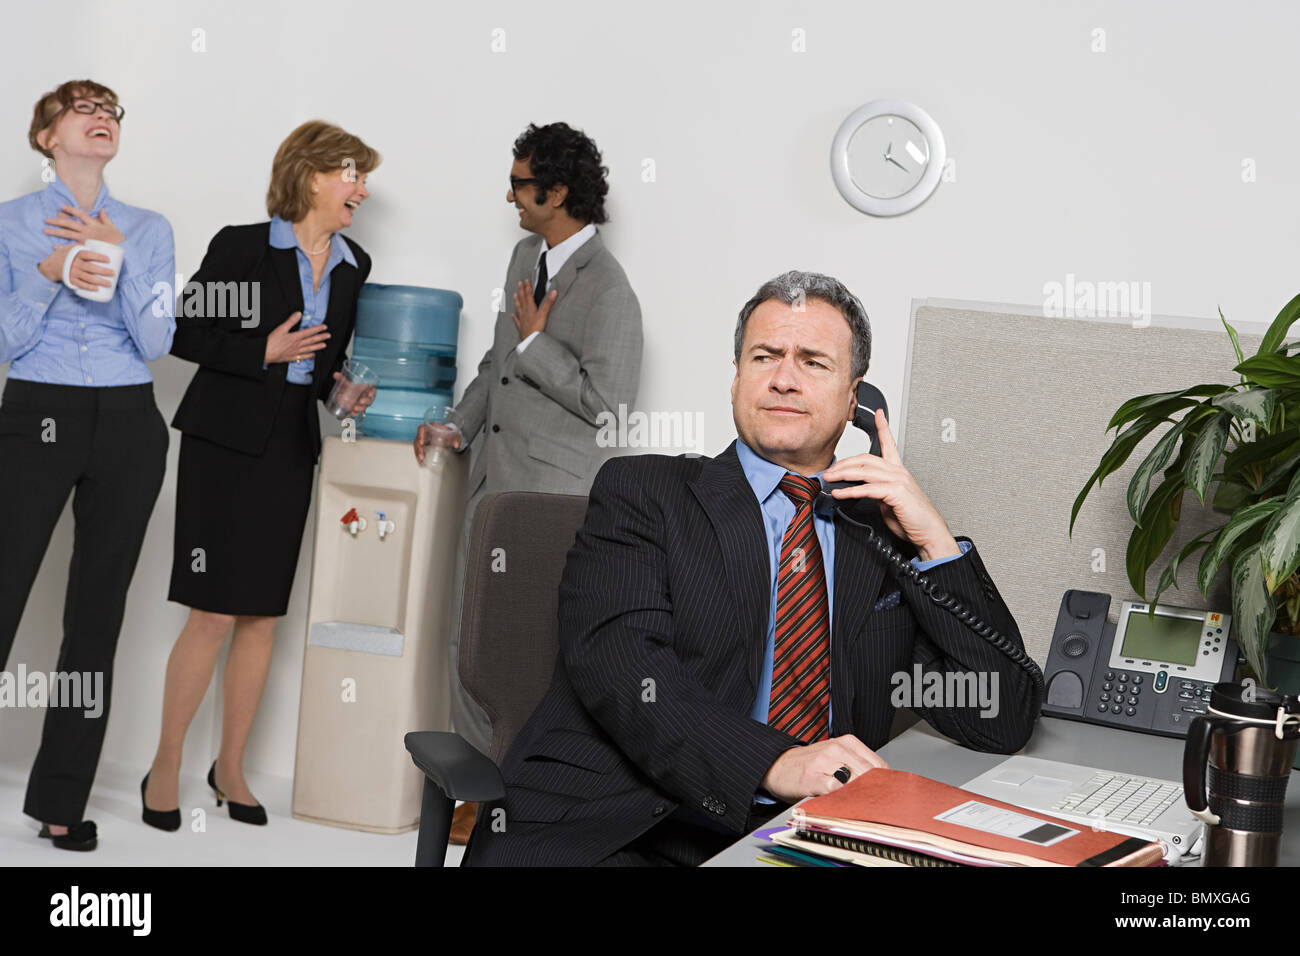 Businessman On Telephone With People Gossiping By Water Cooler Stock Photo Alamy